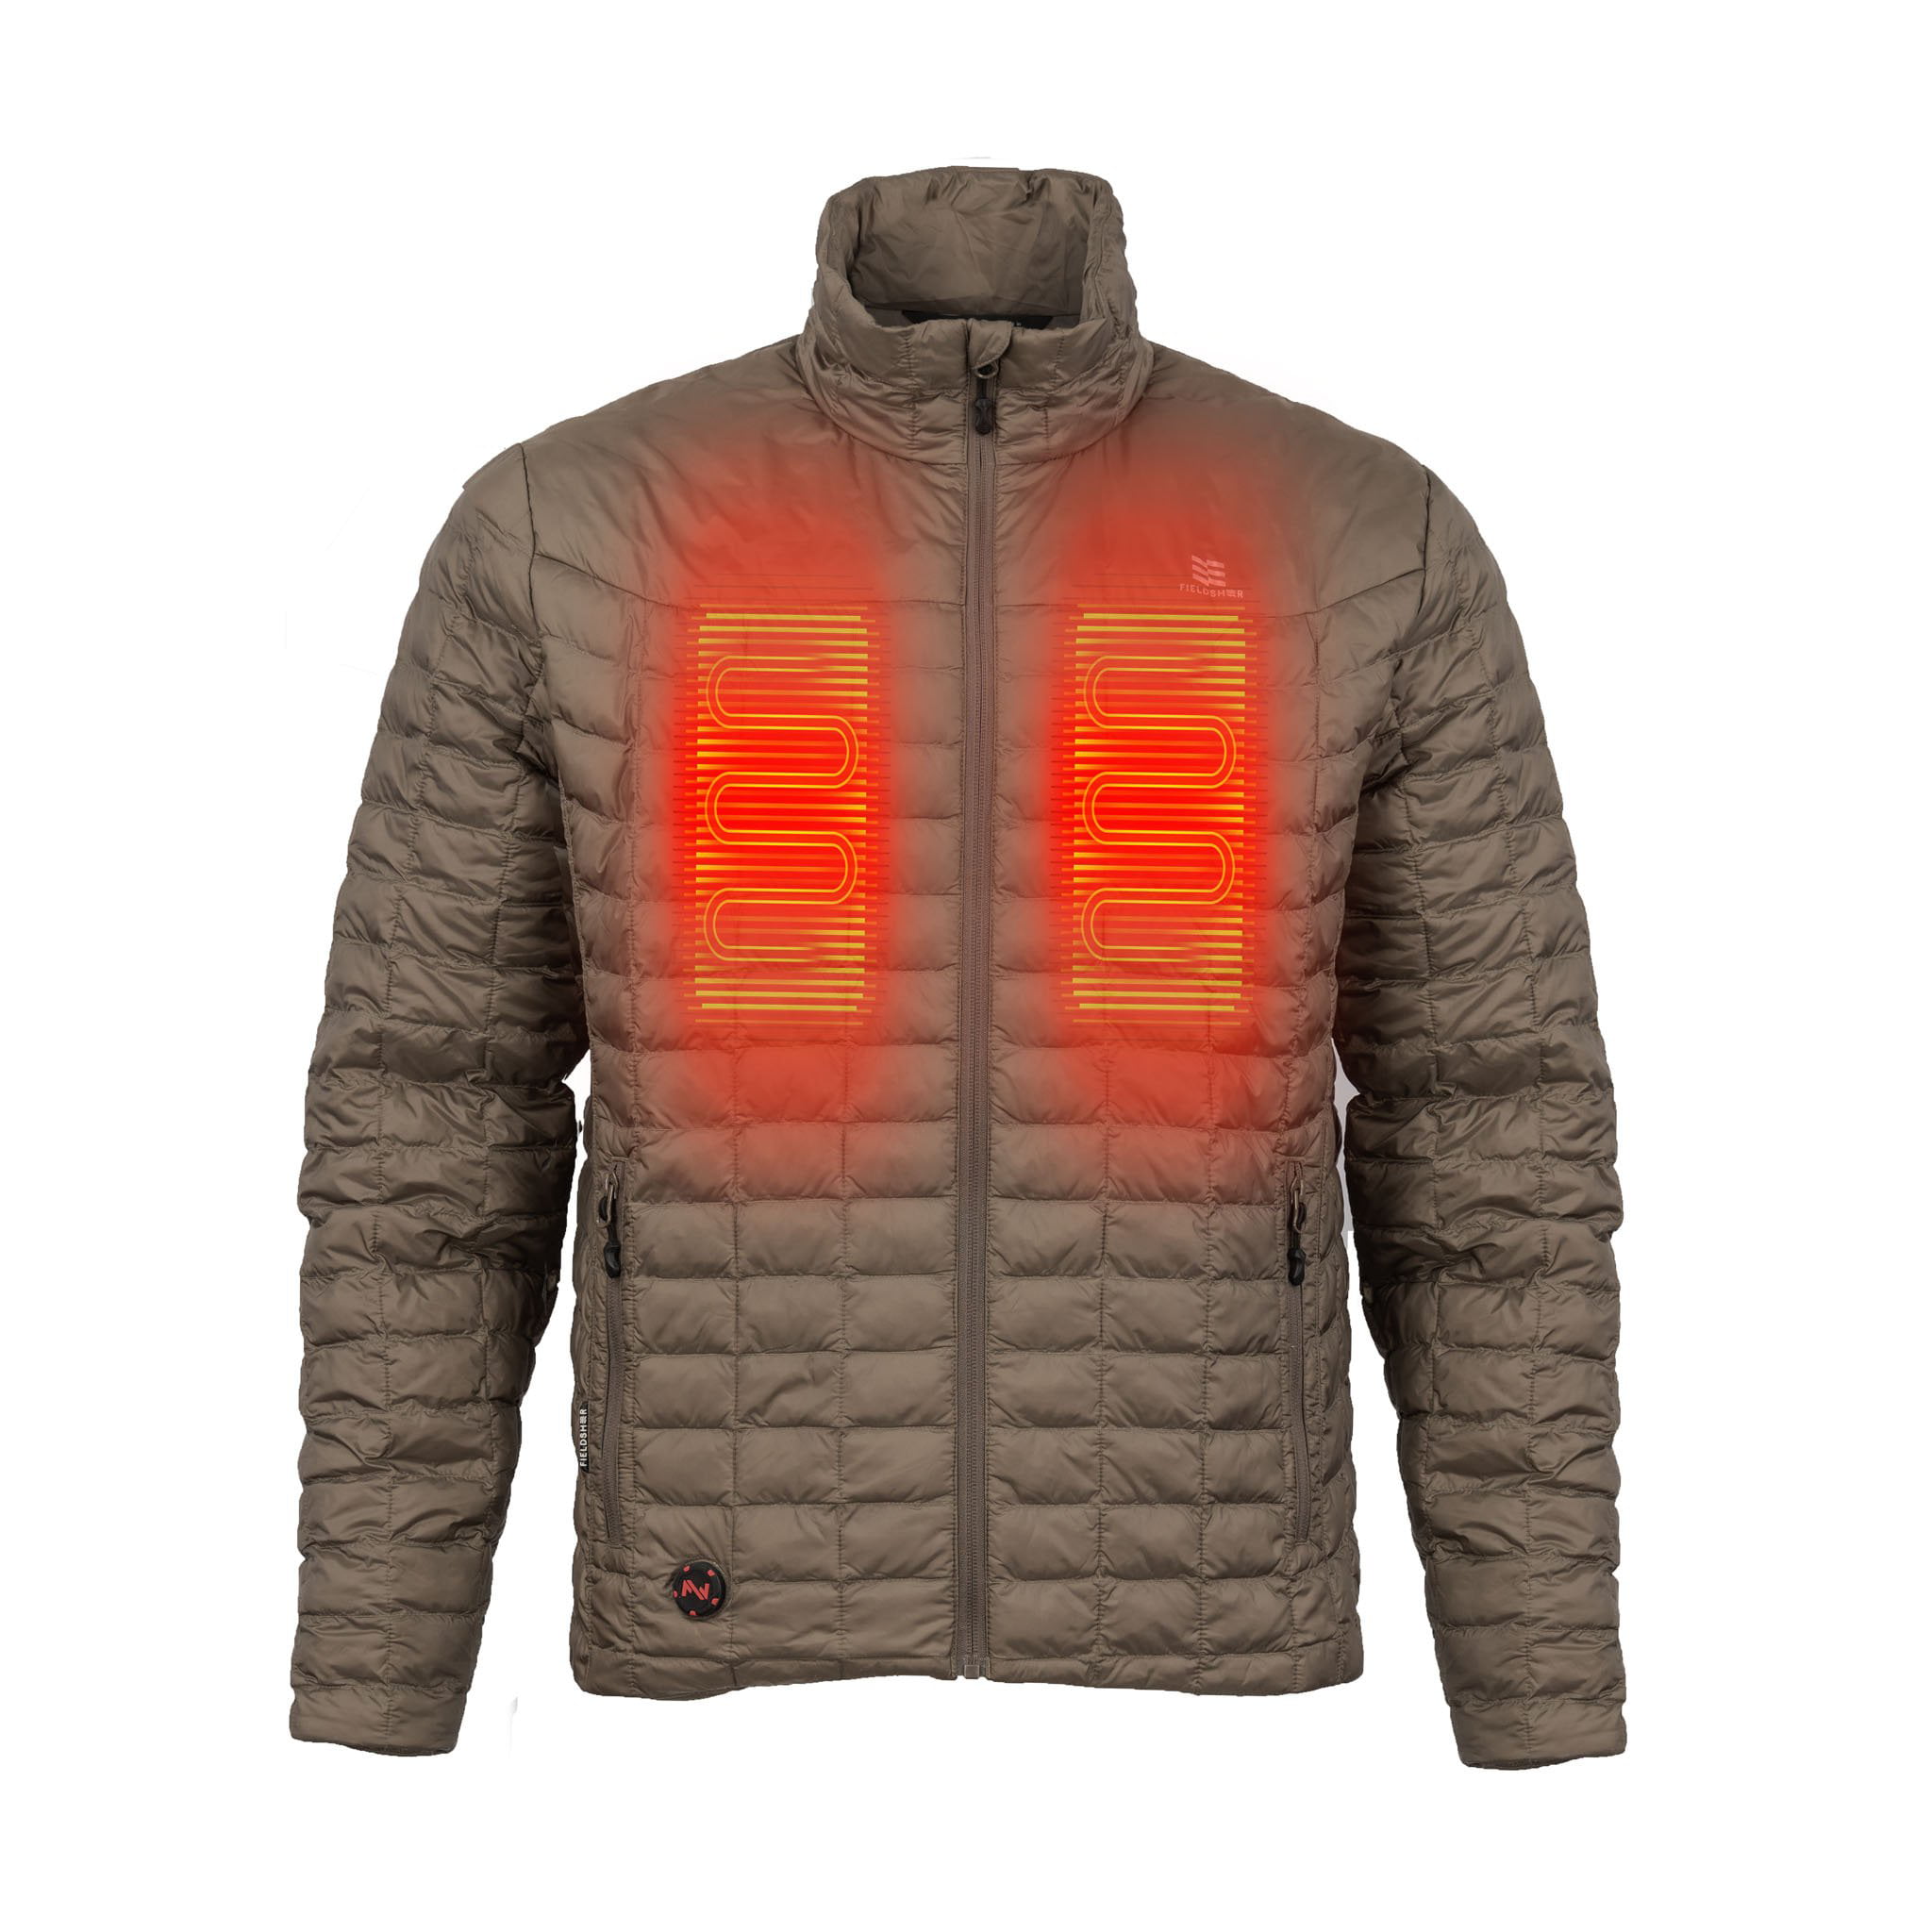 Womens Electric Heated Jacket with Battery Fieldsheer Backcountry